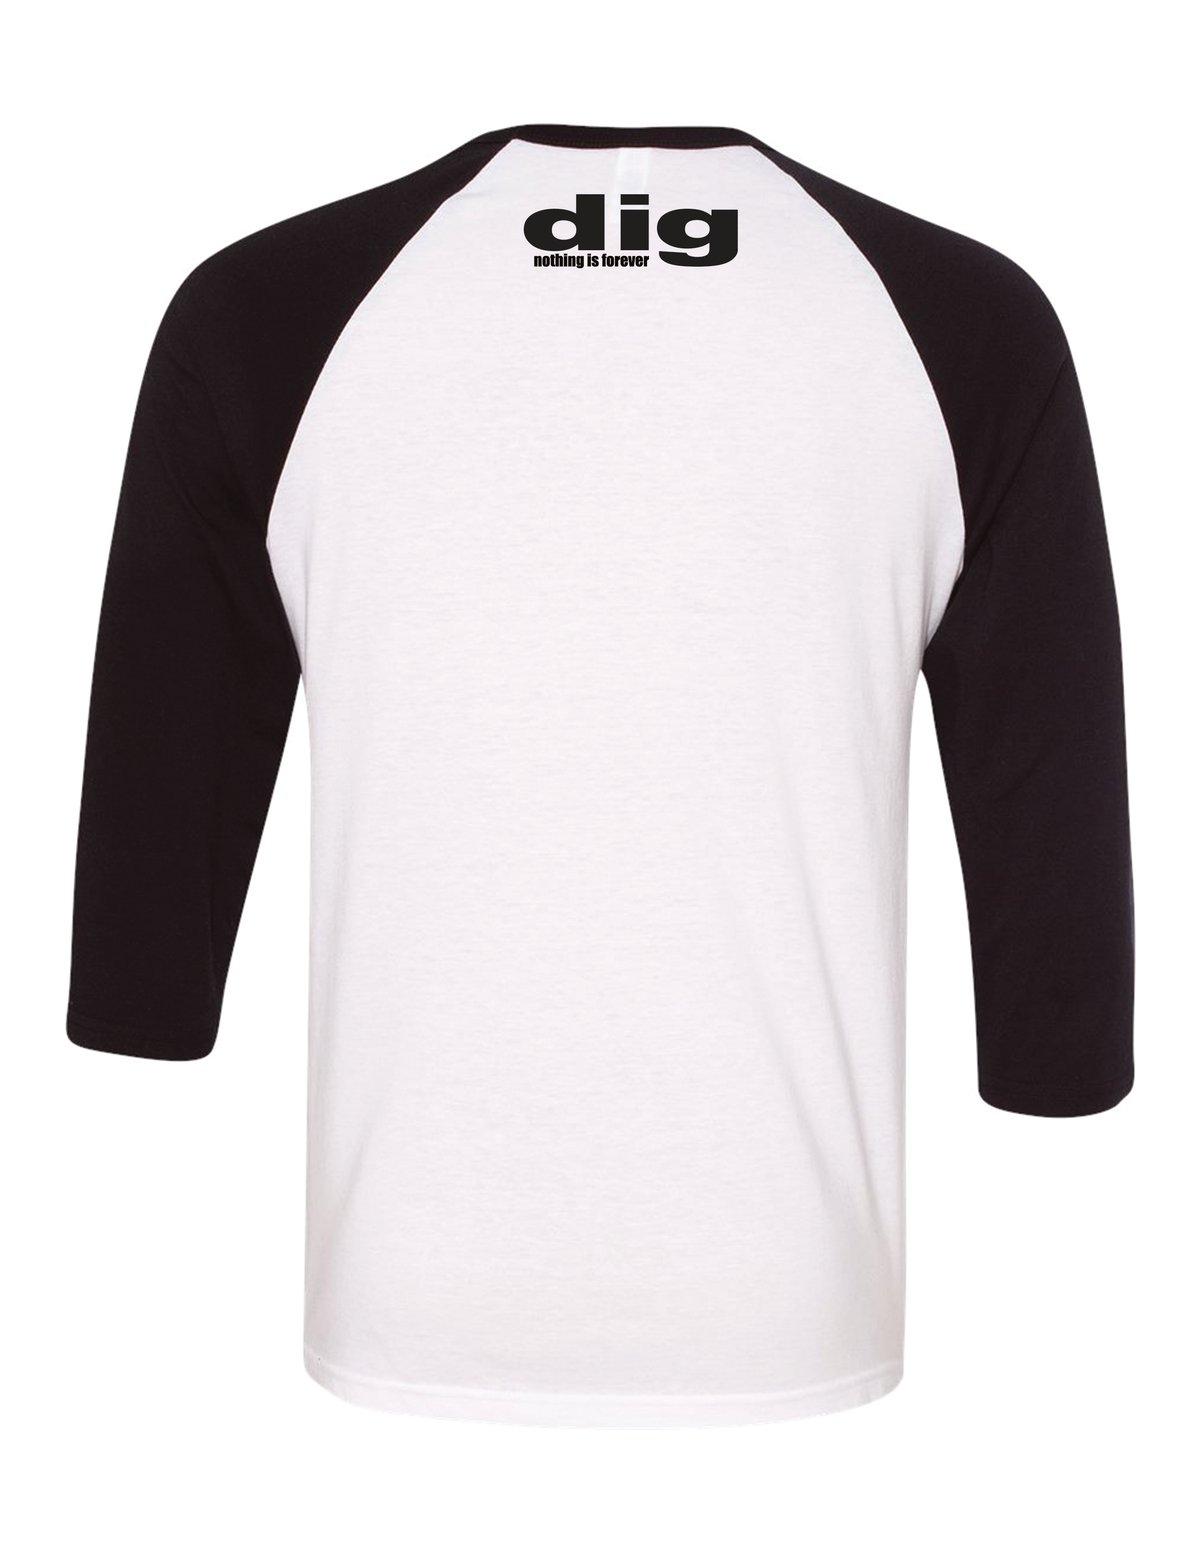 Image of official - dig - "nothing is forever" logo 3/4 sleeve shirt